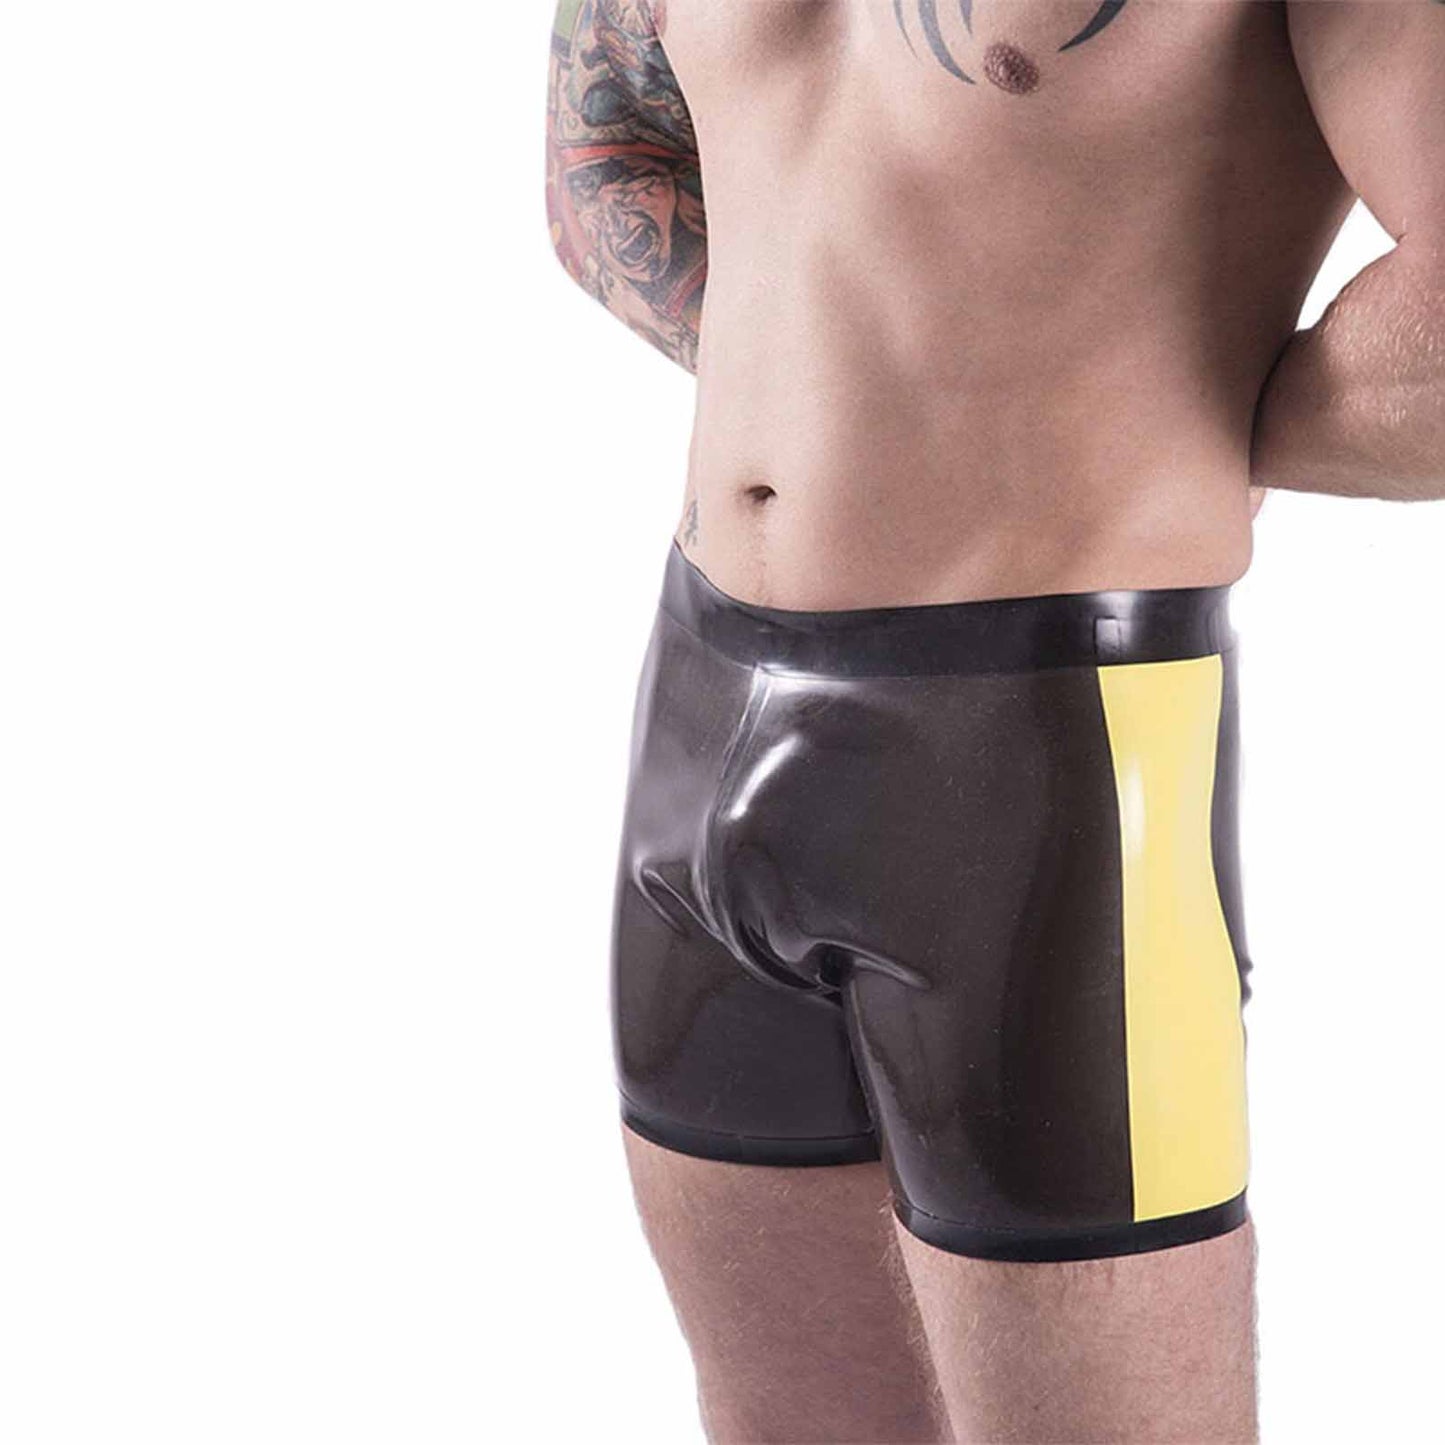 MONNIK Boxer Shorts Latex  Briefs Rubber Panties Tight Underwear Black and Yellow Line Design for Bodysuit Party Cosplay